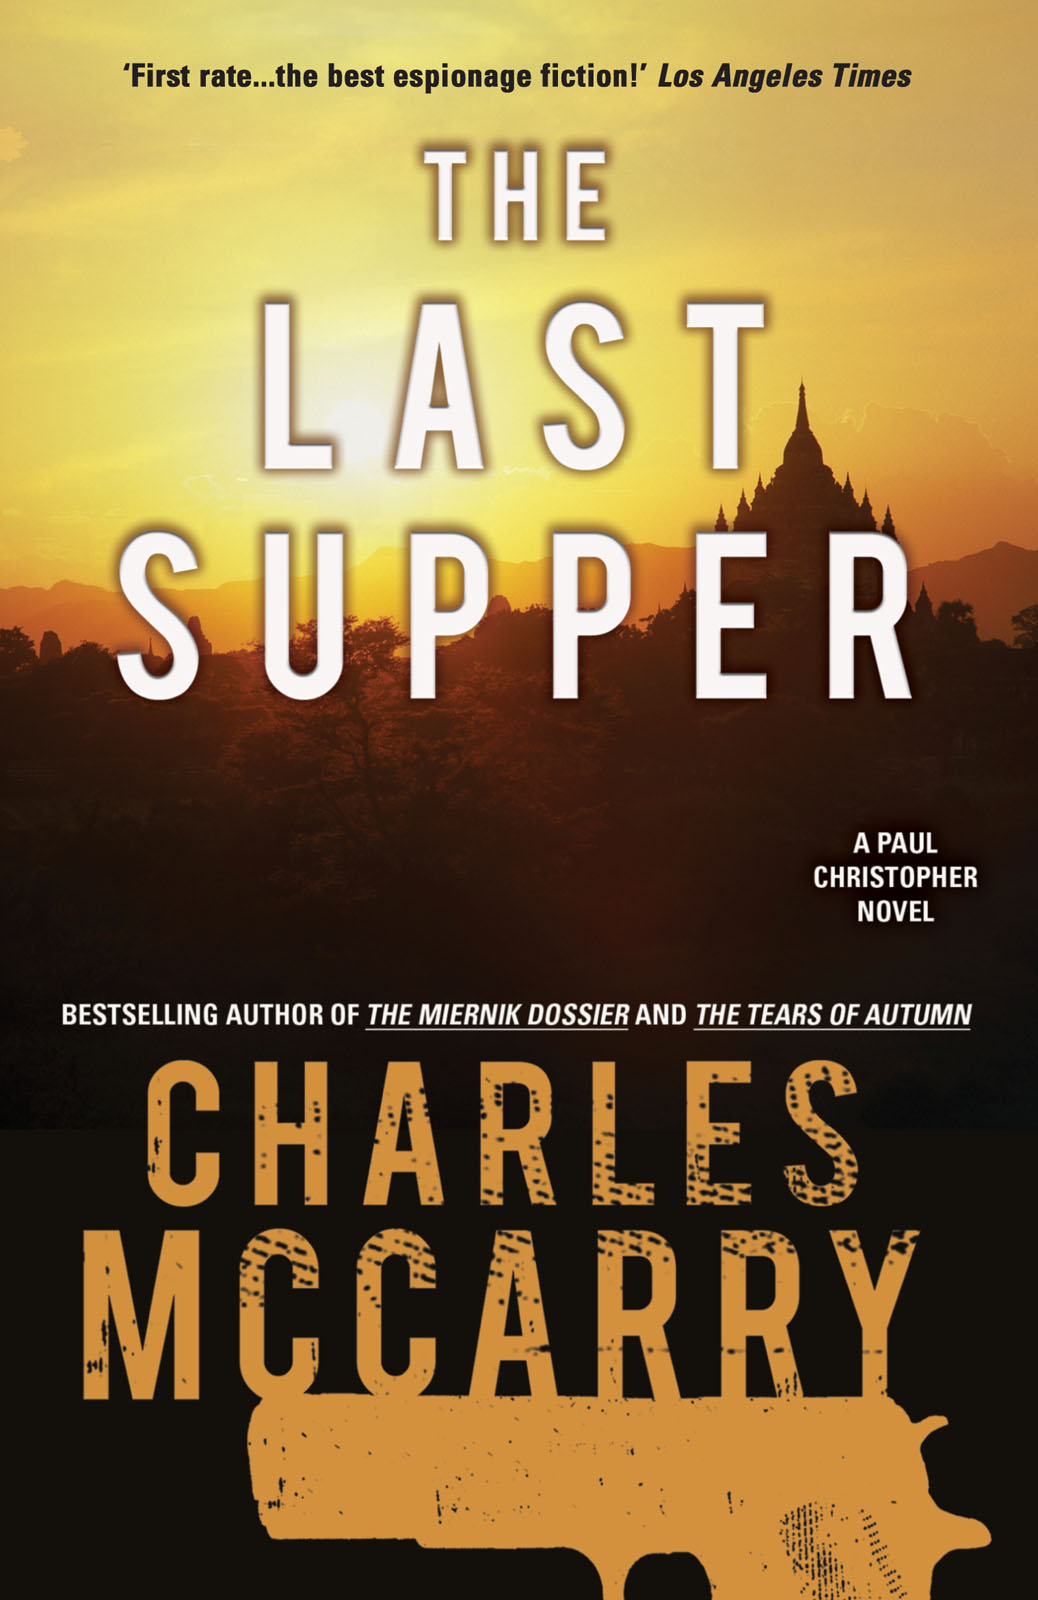 The Last Supper by Charles McCarry